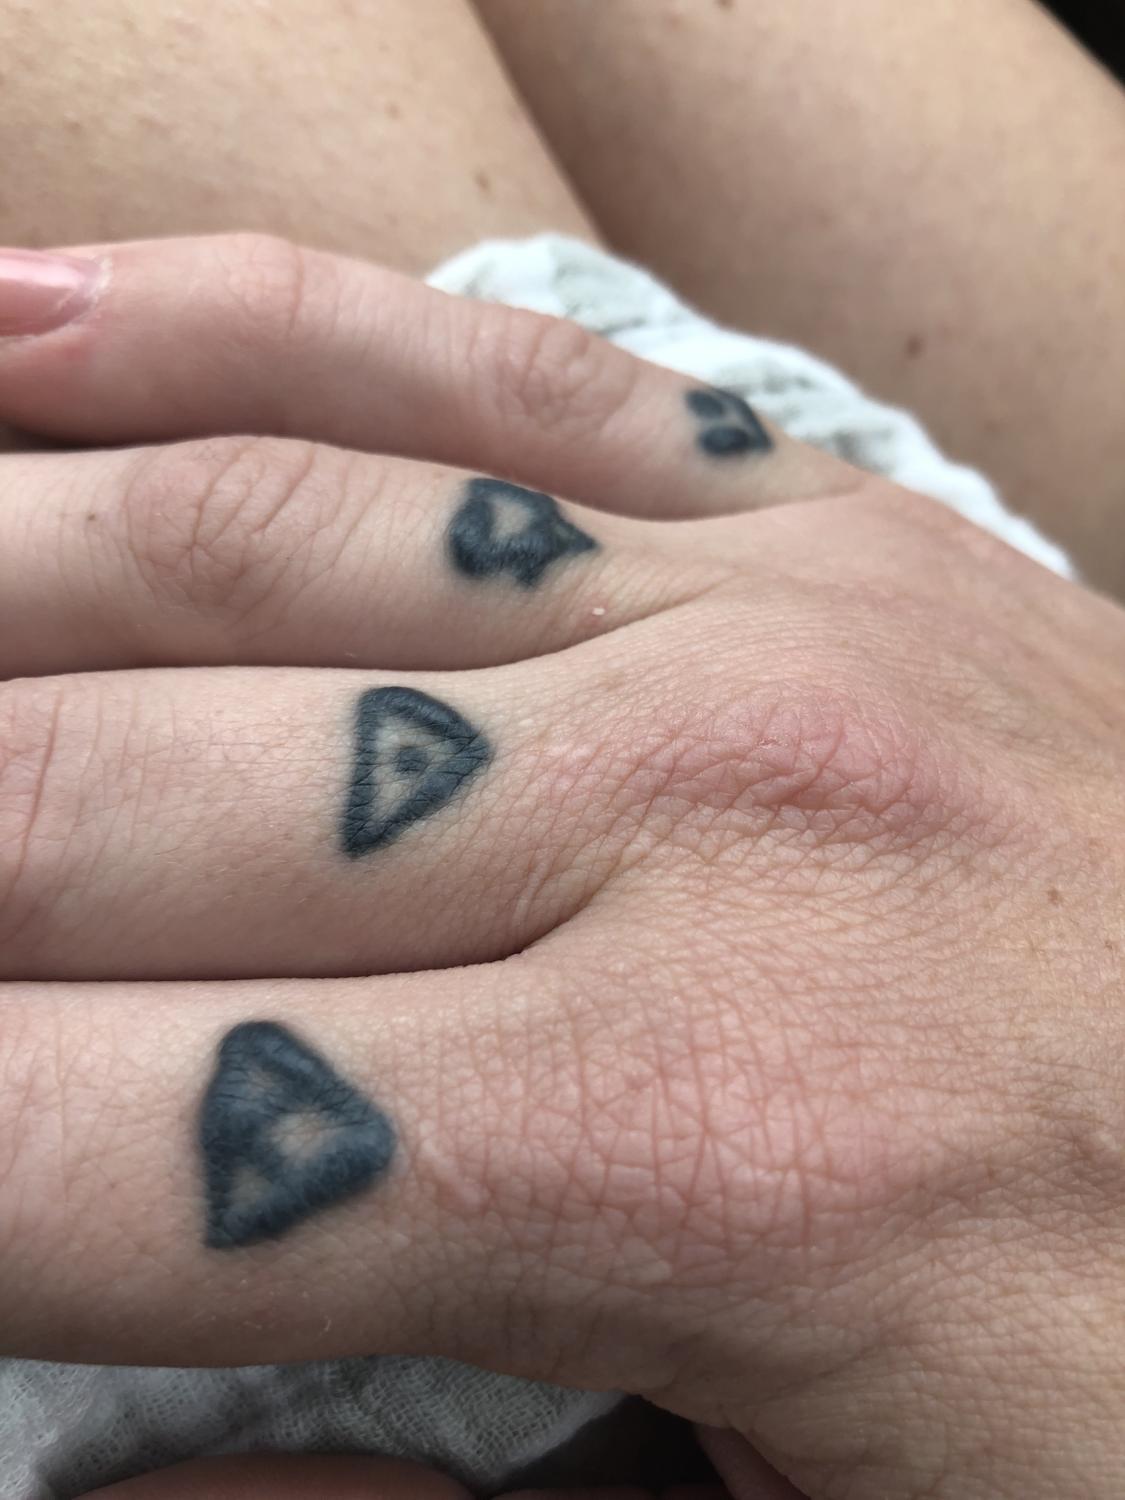 little bumps under 6month old tattoo - Tattoo After Care - Last Sparrow  Tattoo